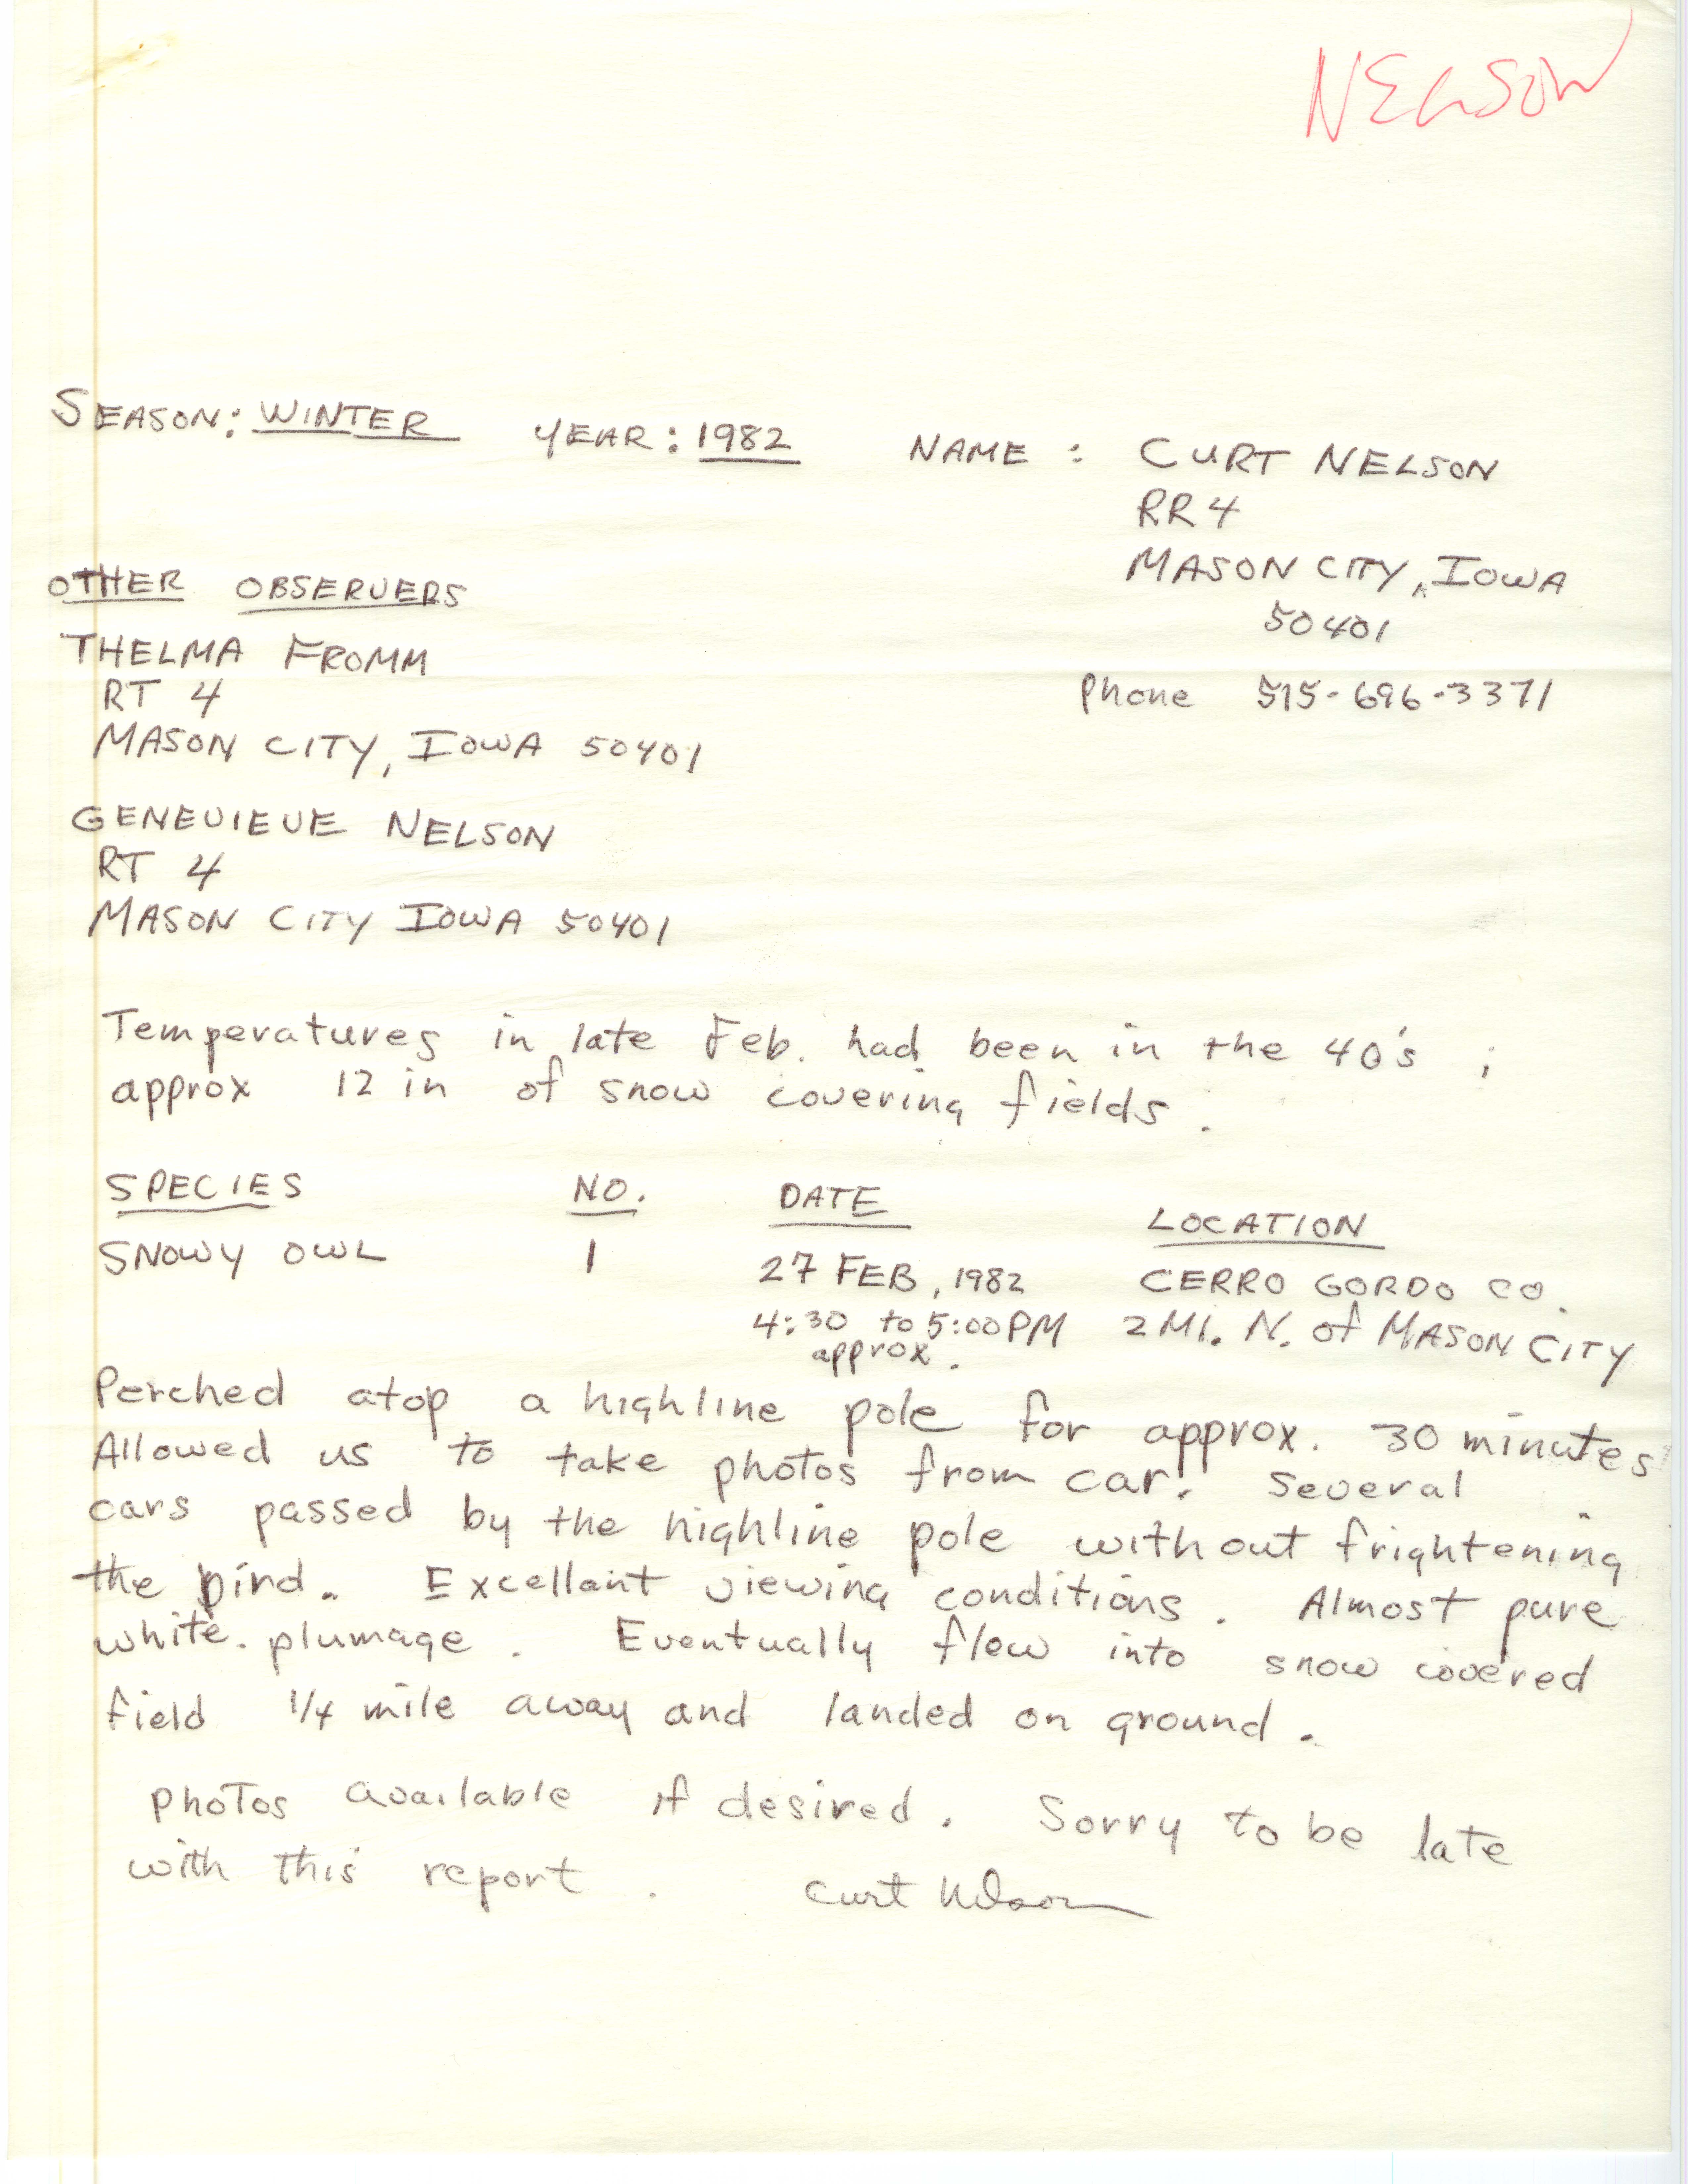 Field notes contributed by Curt Nelson, winter 1981-1982